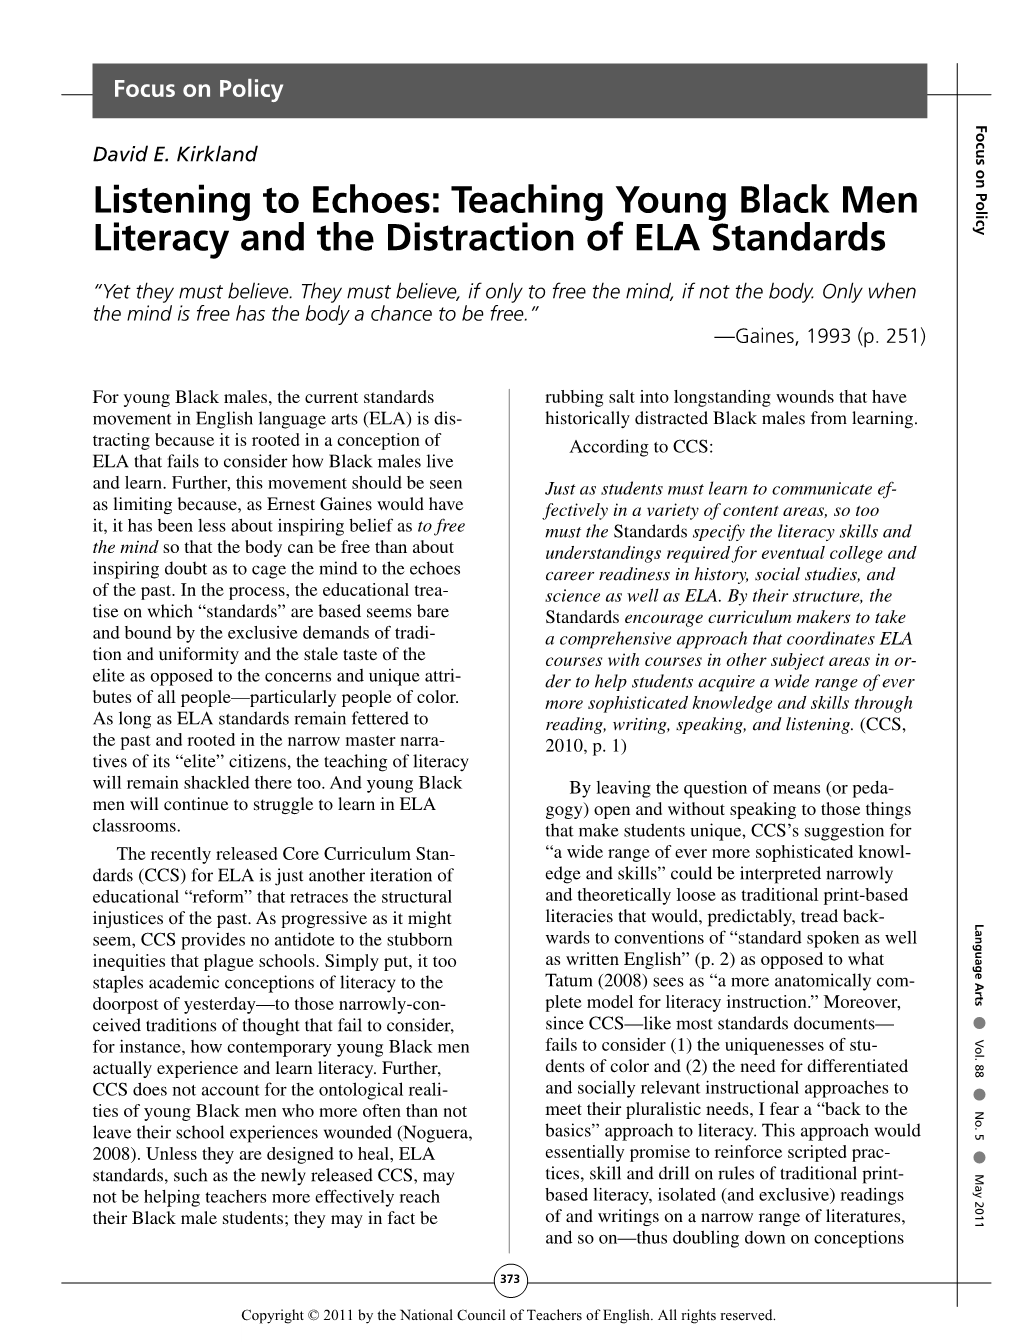 Teaching Young Black Men Literacy and the Distraction of ELA Standards